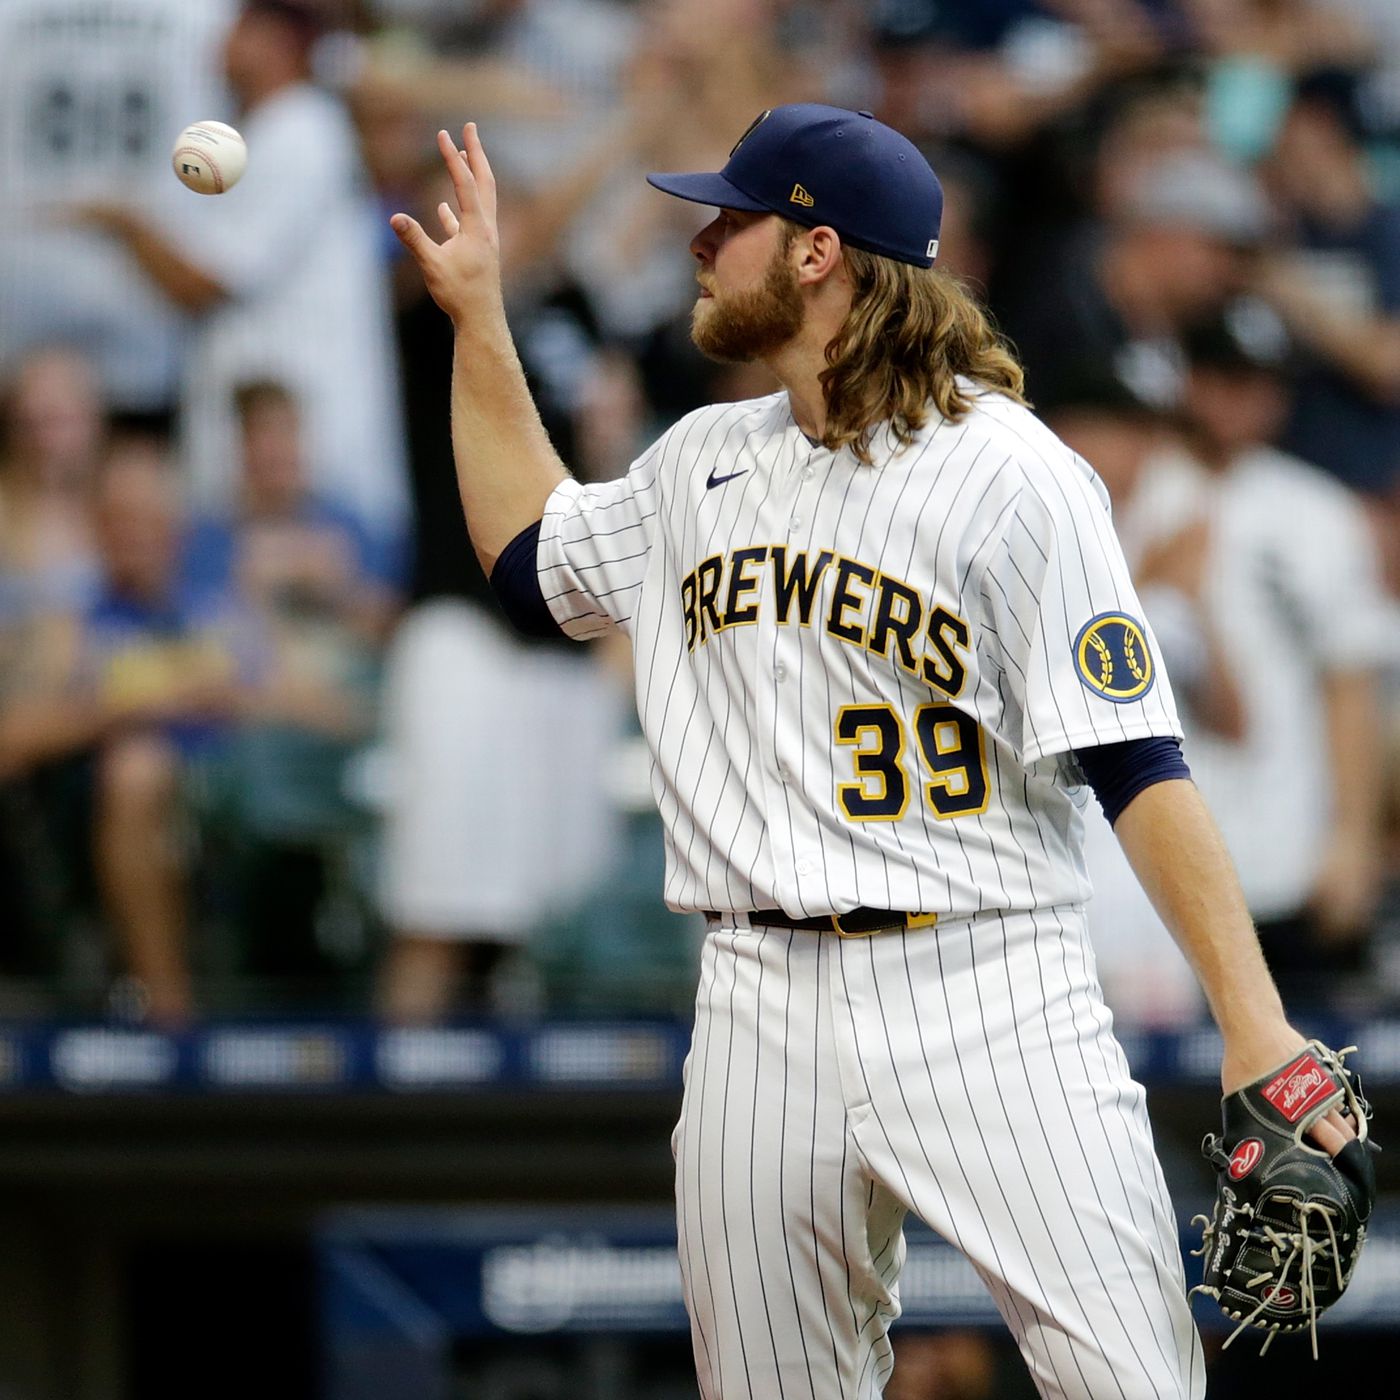 Brewers shutout Cubs, 10-0, behind record-setting start from Corbin Burnes - Brew Crew Ball